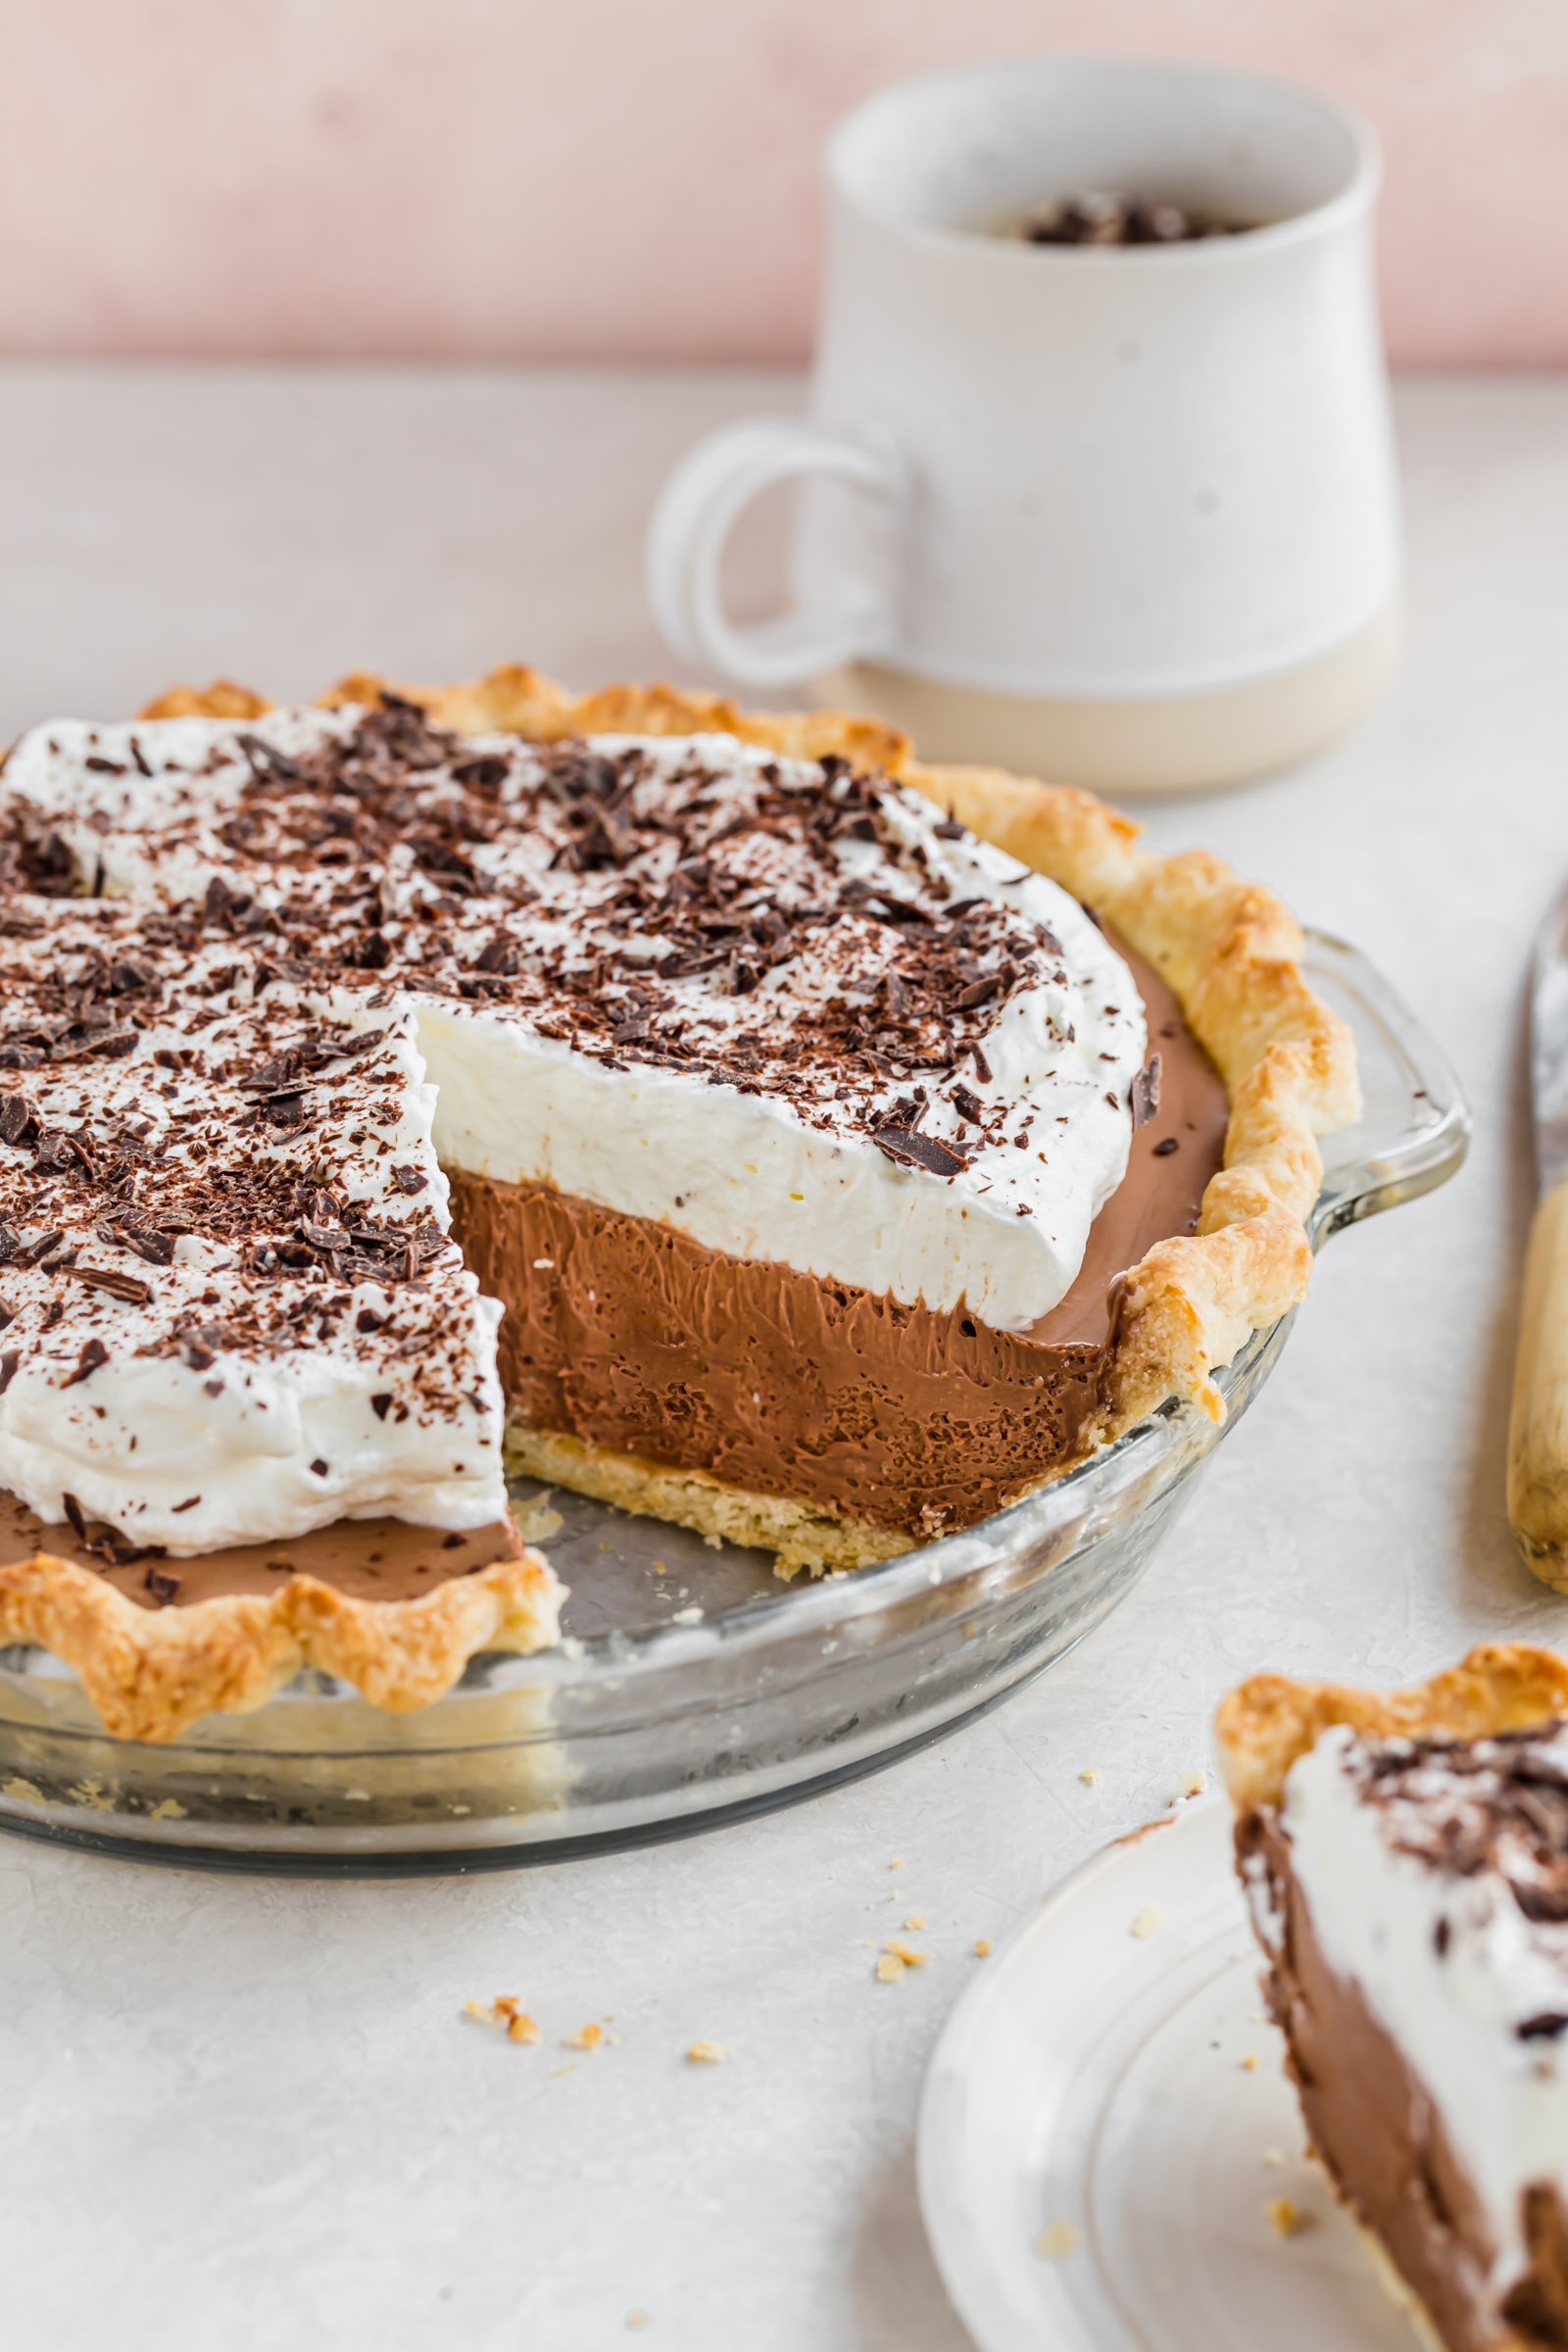 Side view of French silk pie in glass pie plate with one slice removed and coffee mug in background.